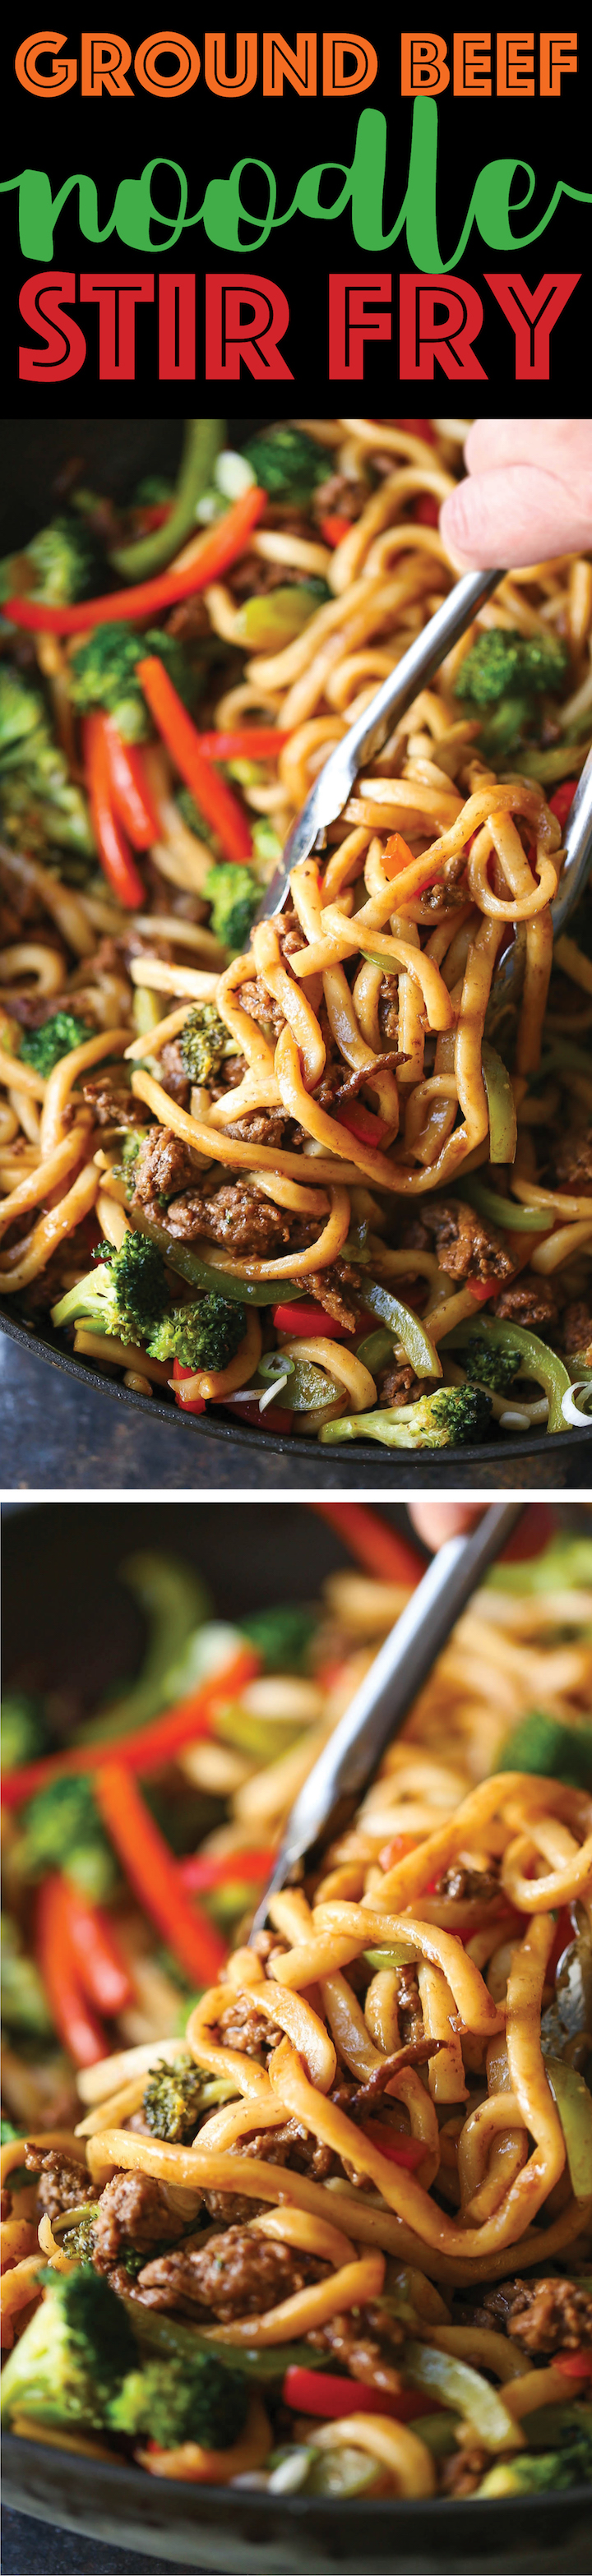 Ground Beef Noodle Stir Fry - Use up all those veggies in the easiest stir-fry of all! Quick, simple and completely customizable to what you have on hand!